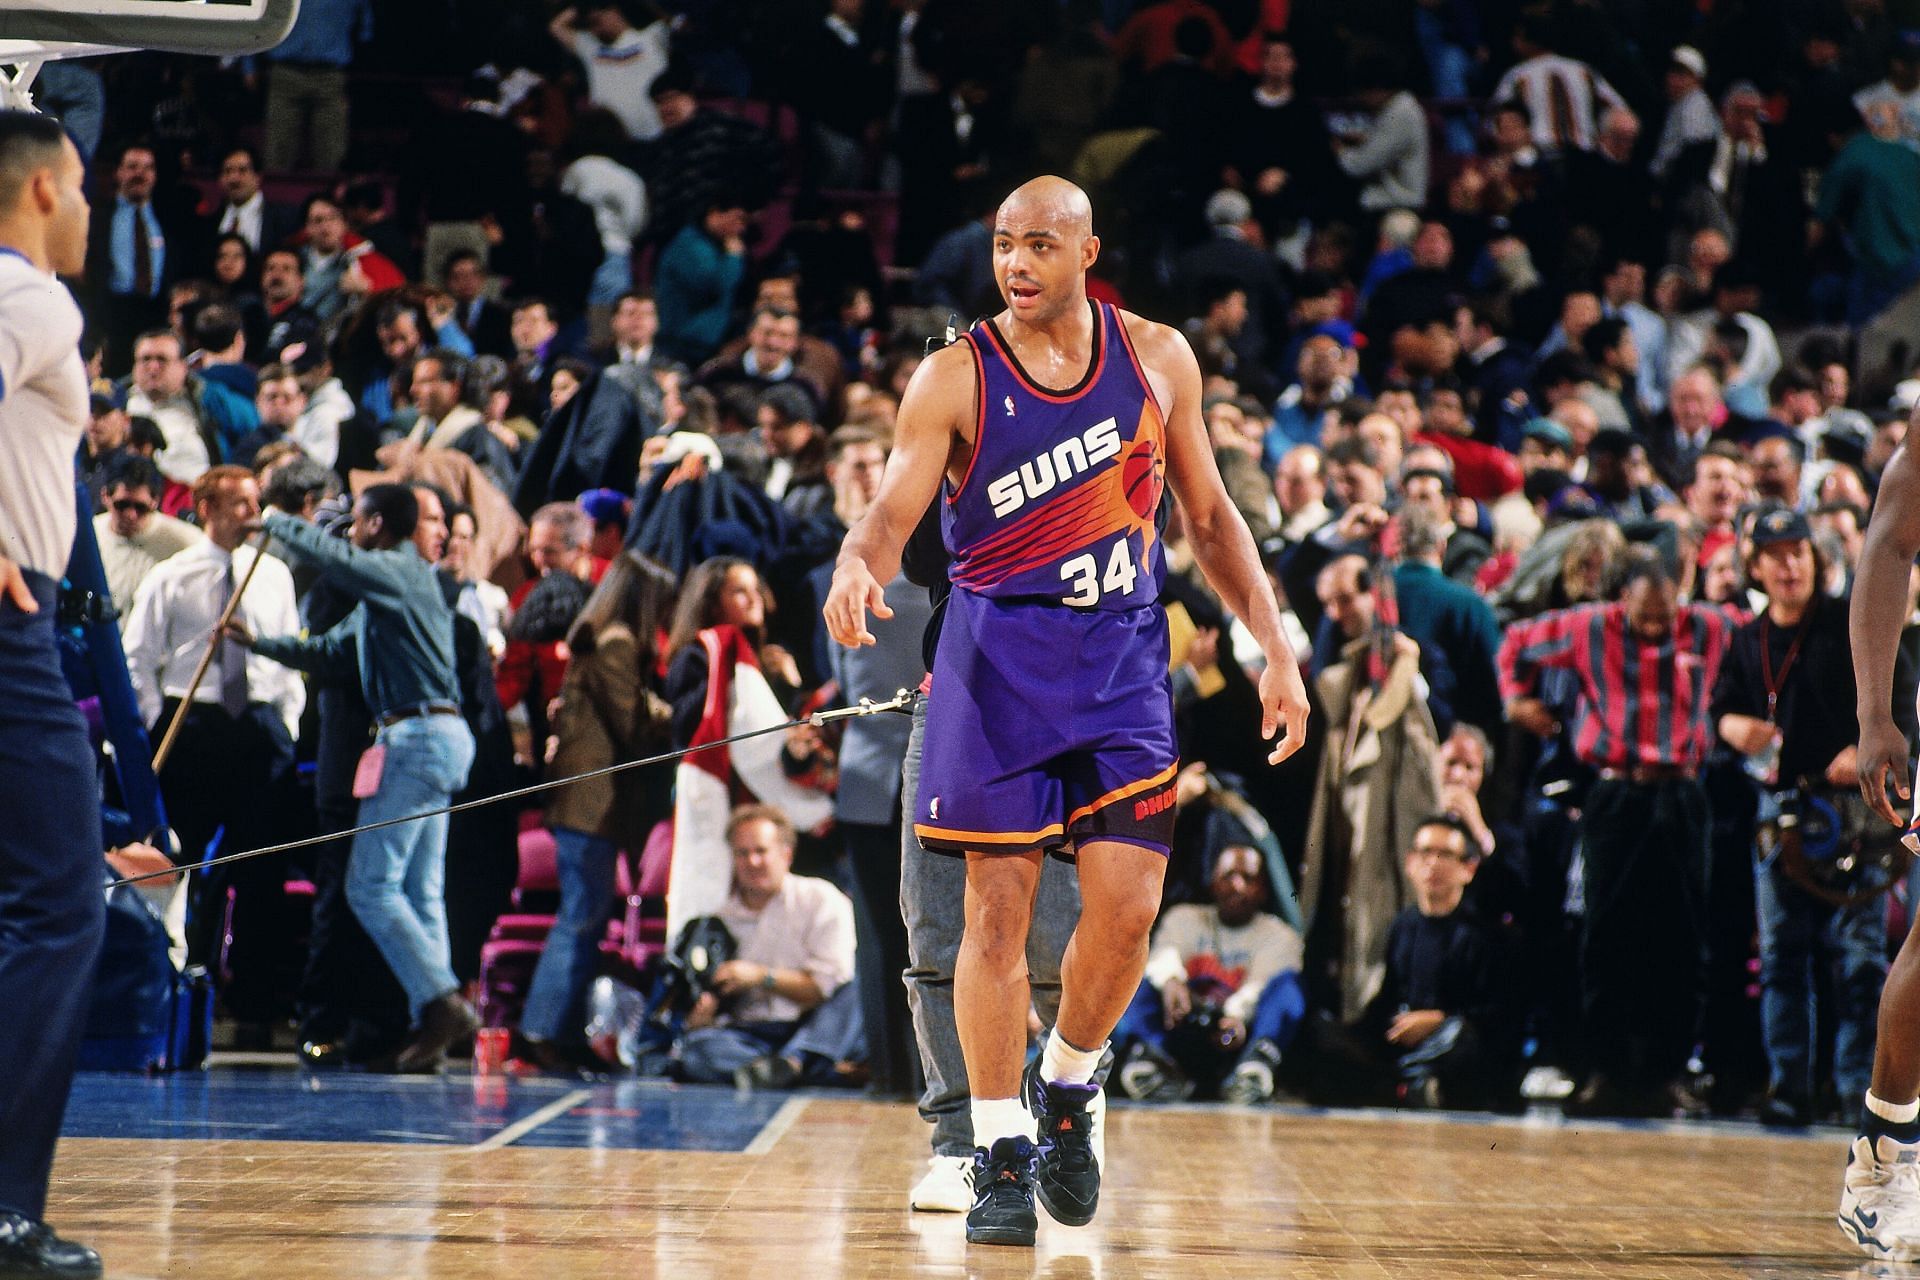 Charles Barkley playing for the Suns.